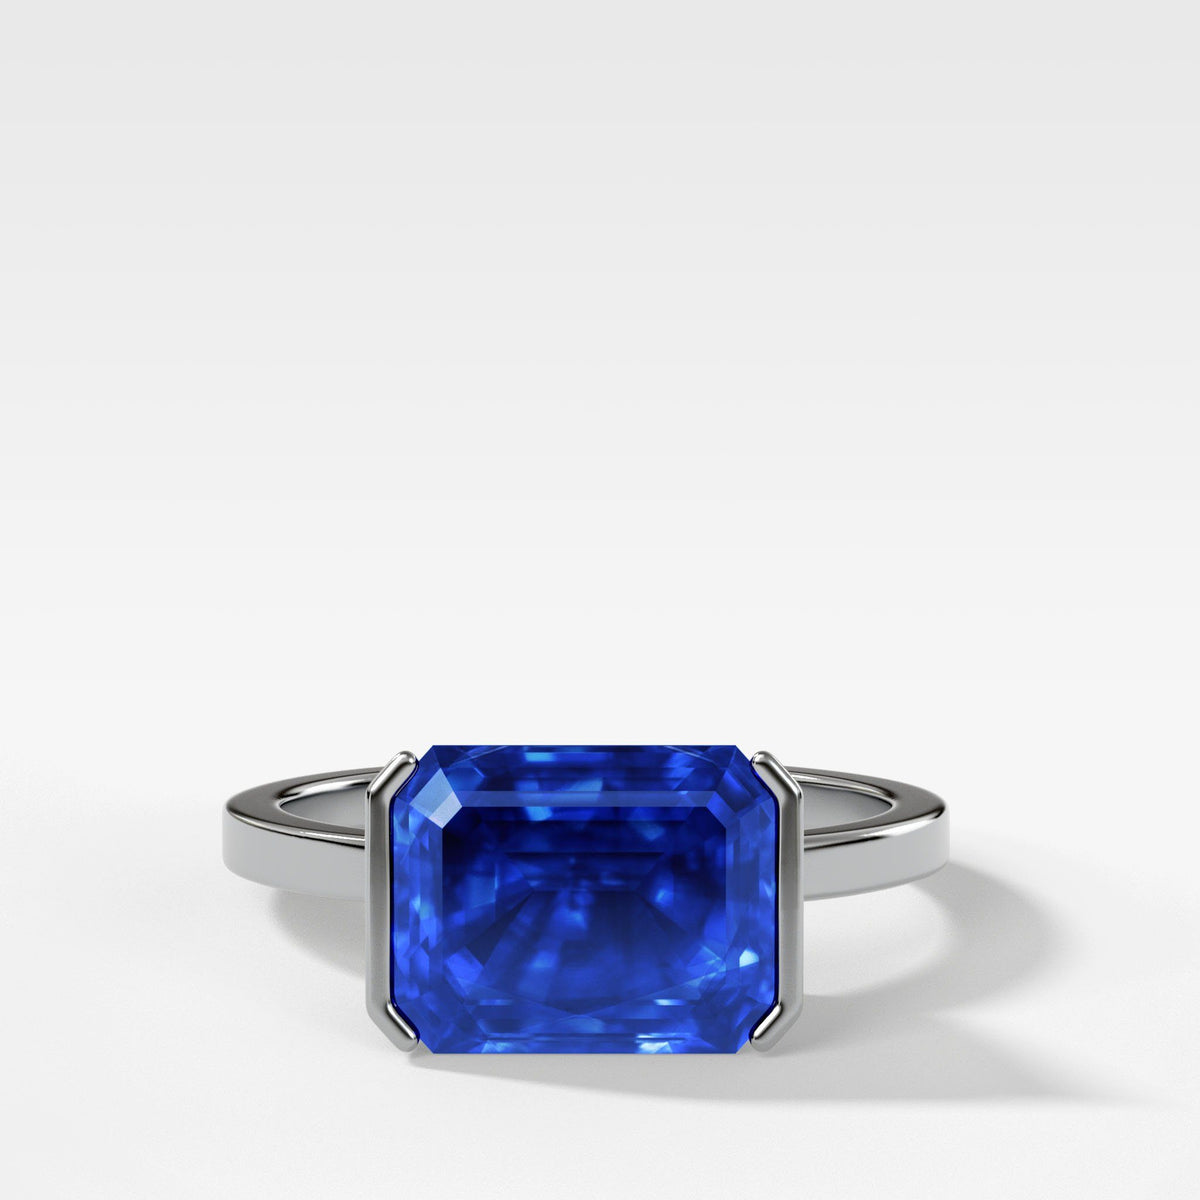 East West Half Bezel Solitaire with 2.99ct Emerald Ceylon Blue Sapphire by Good Stone in White Gold